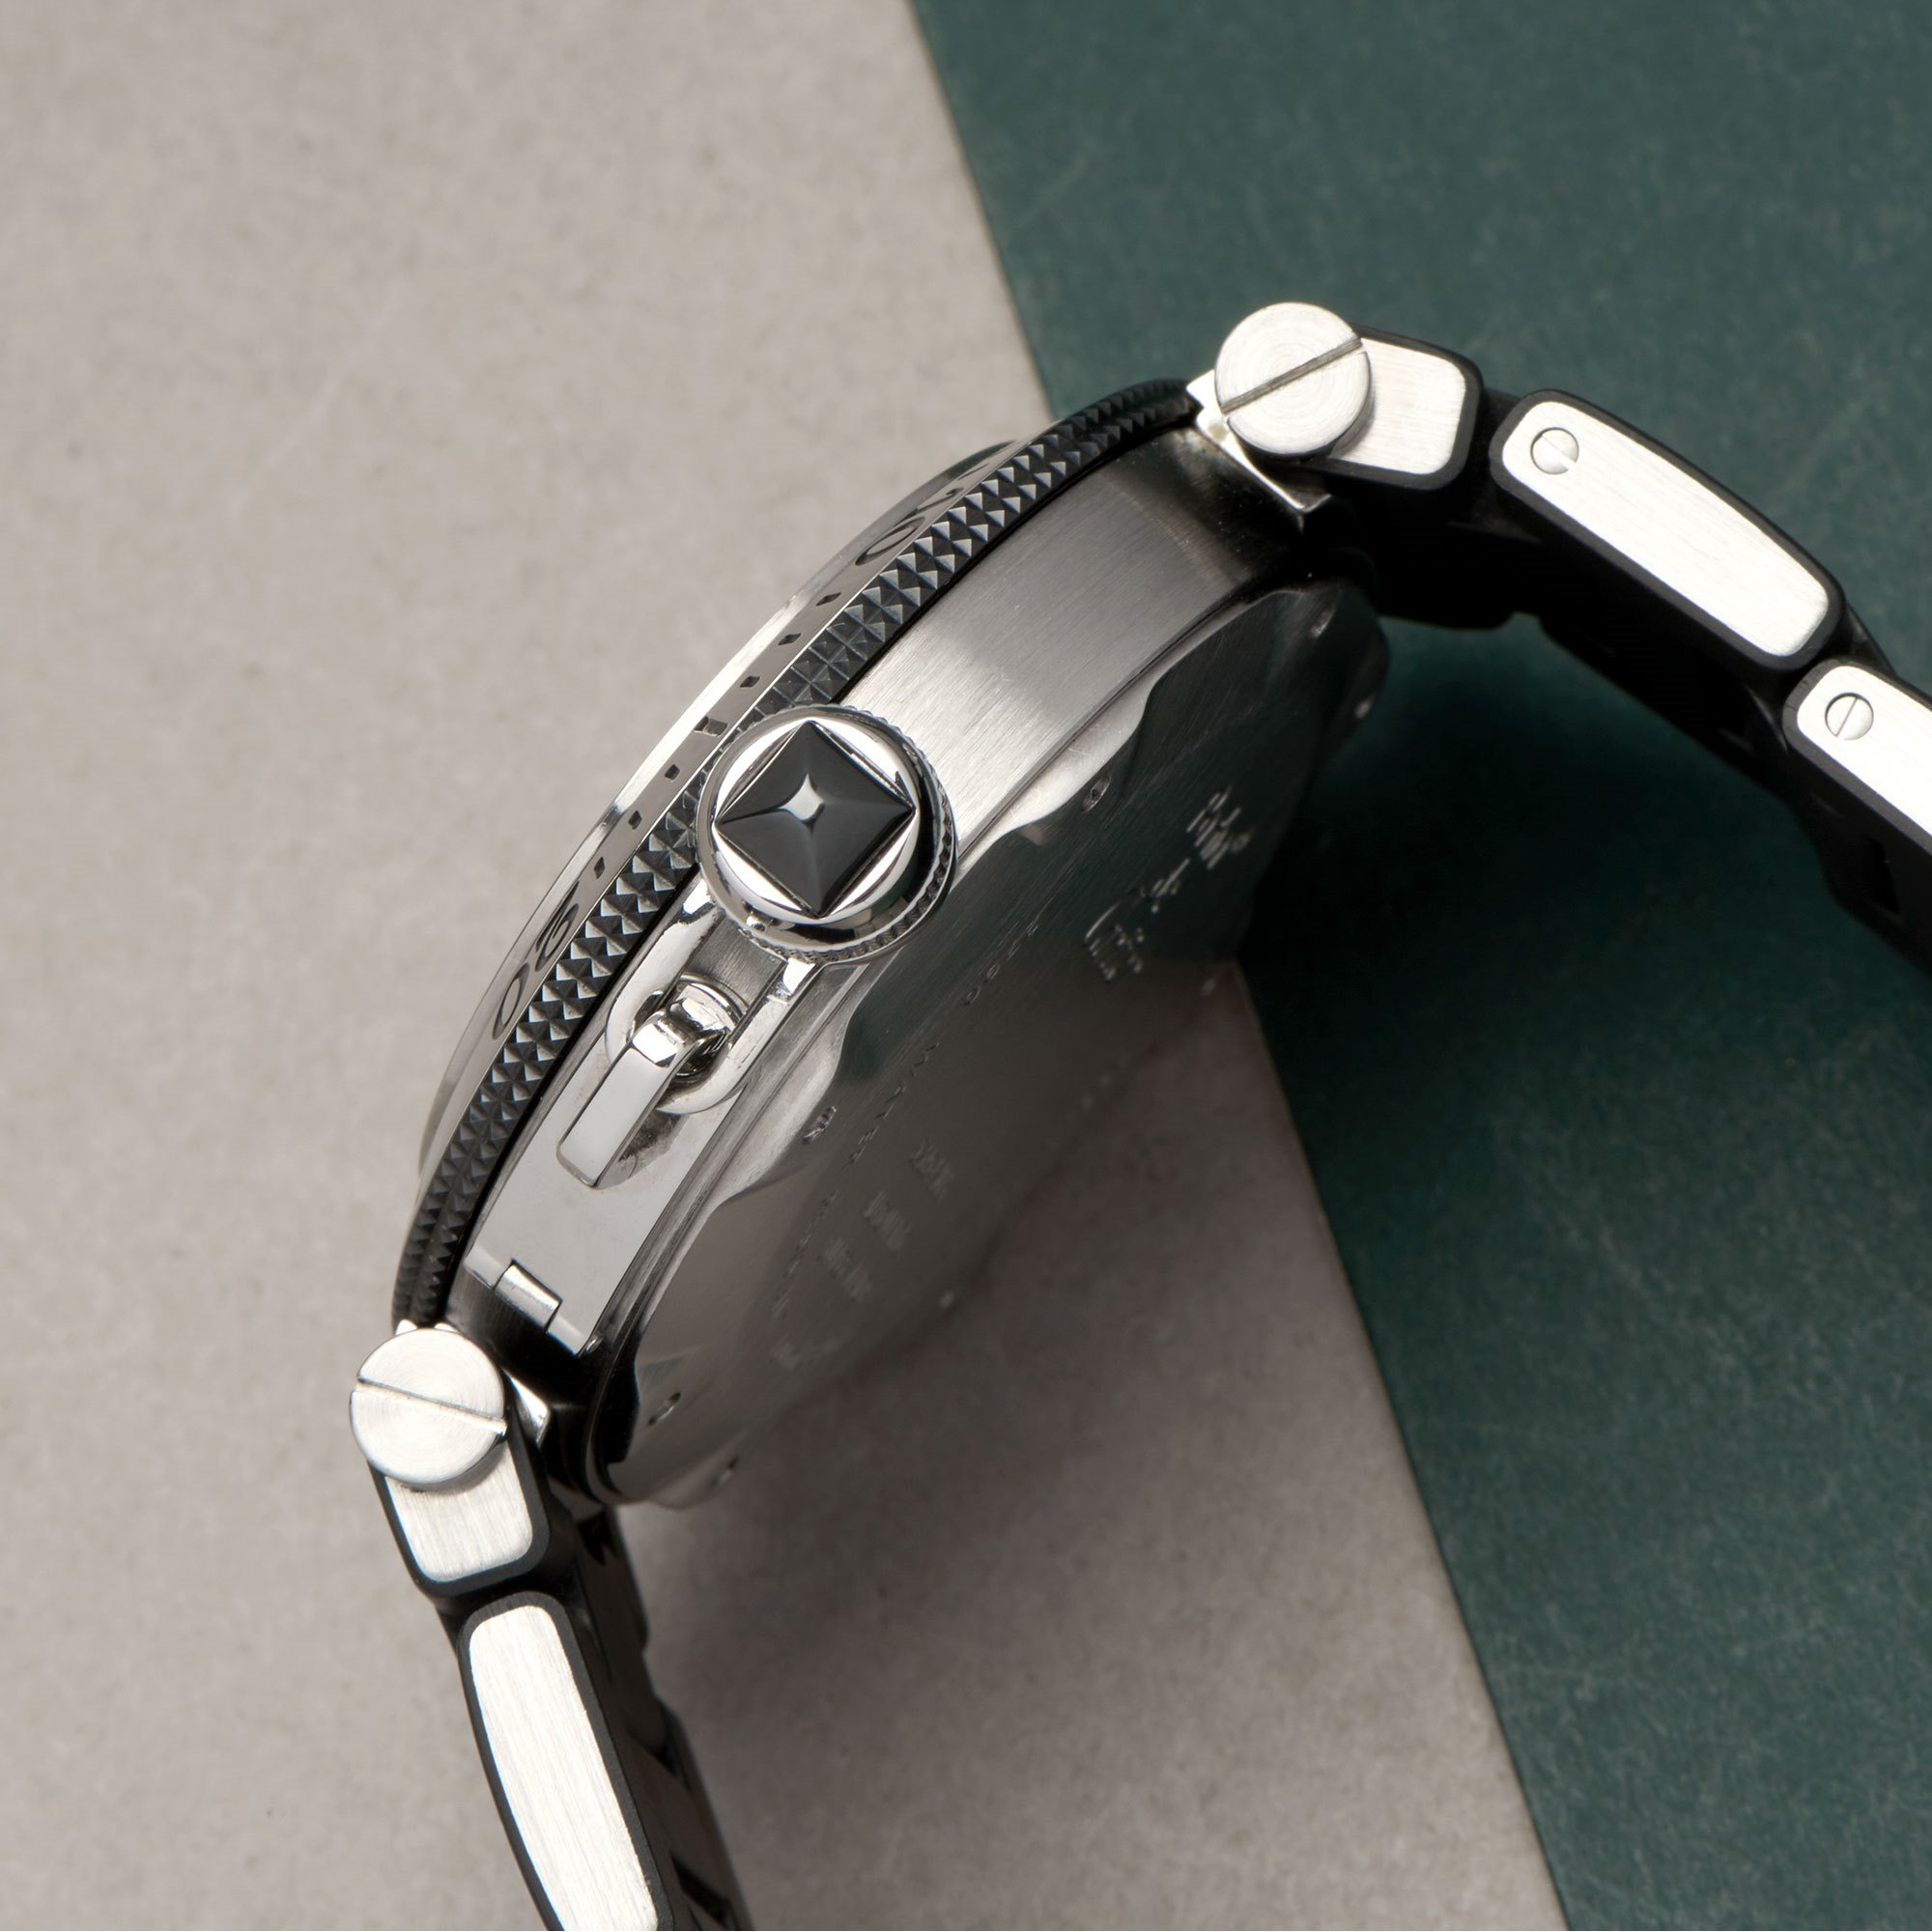 Cartier Pasha Roestvrij Staal W31077U2 or 2790